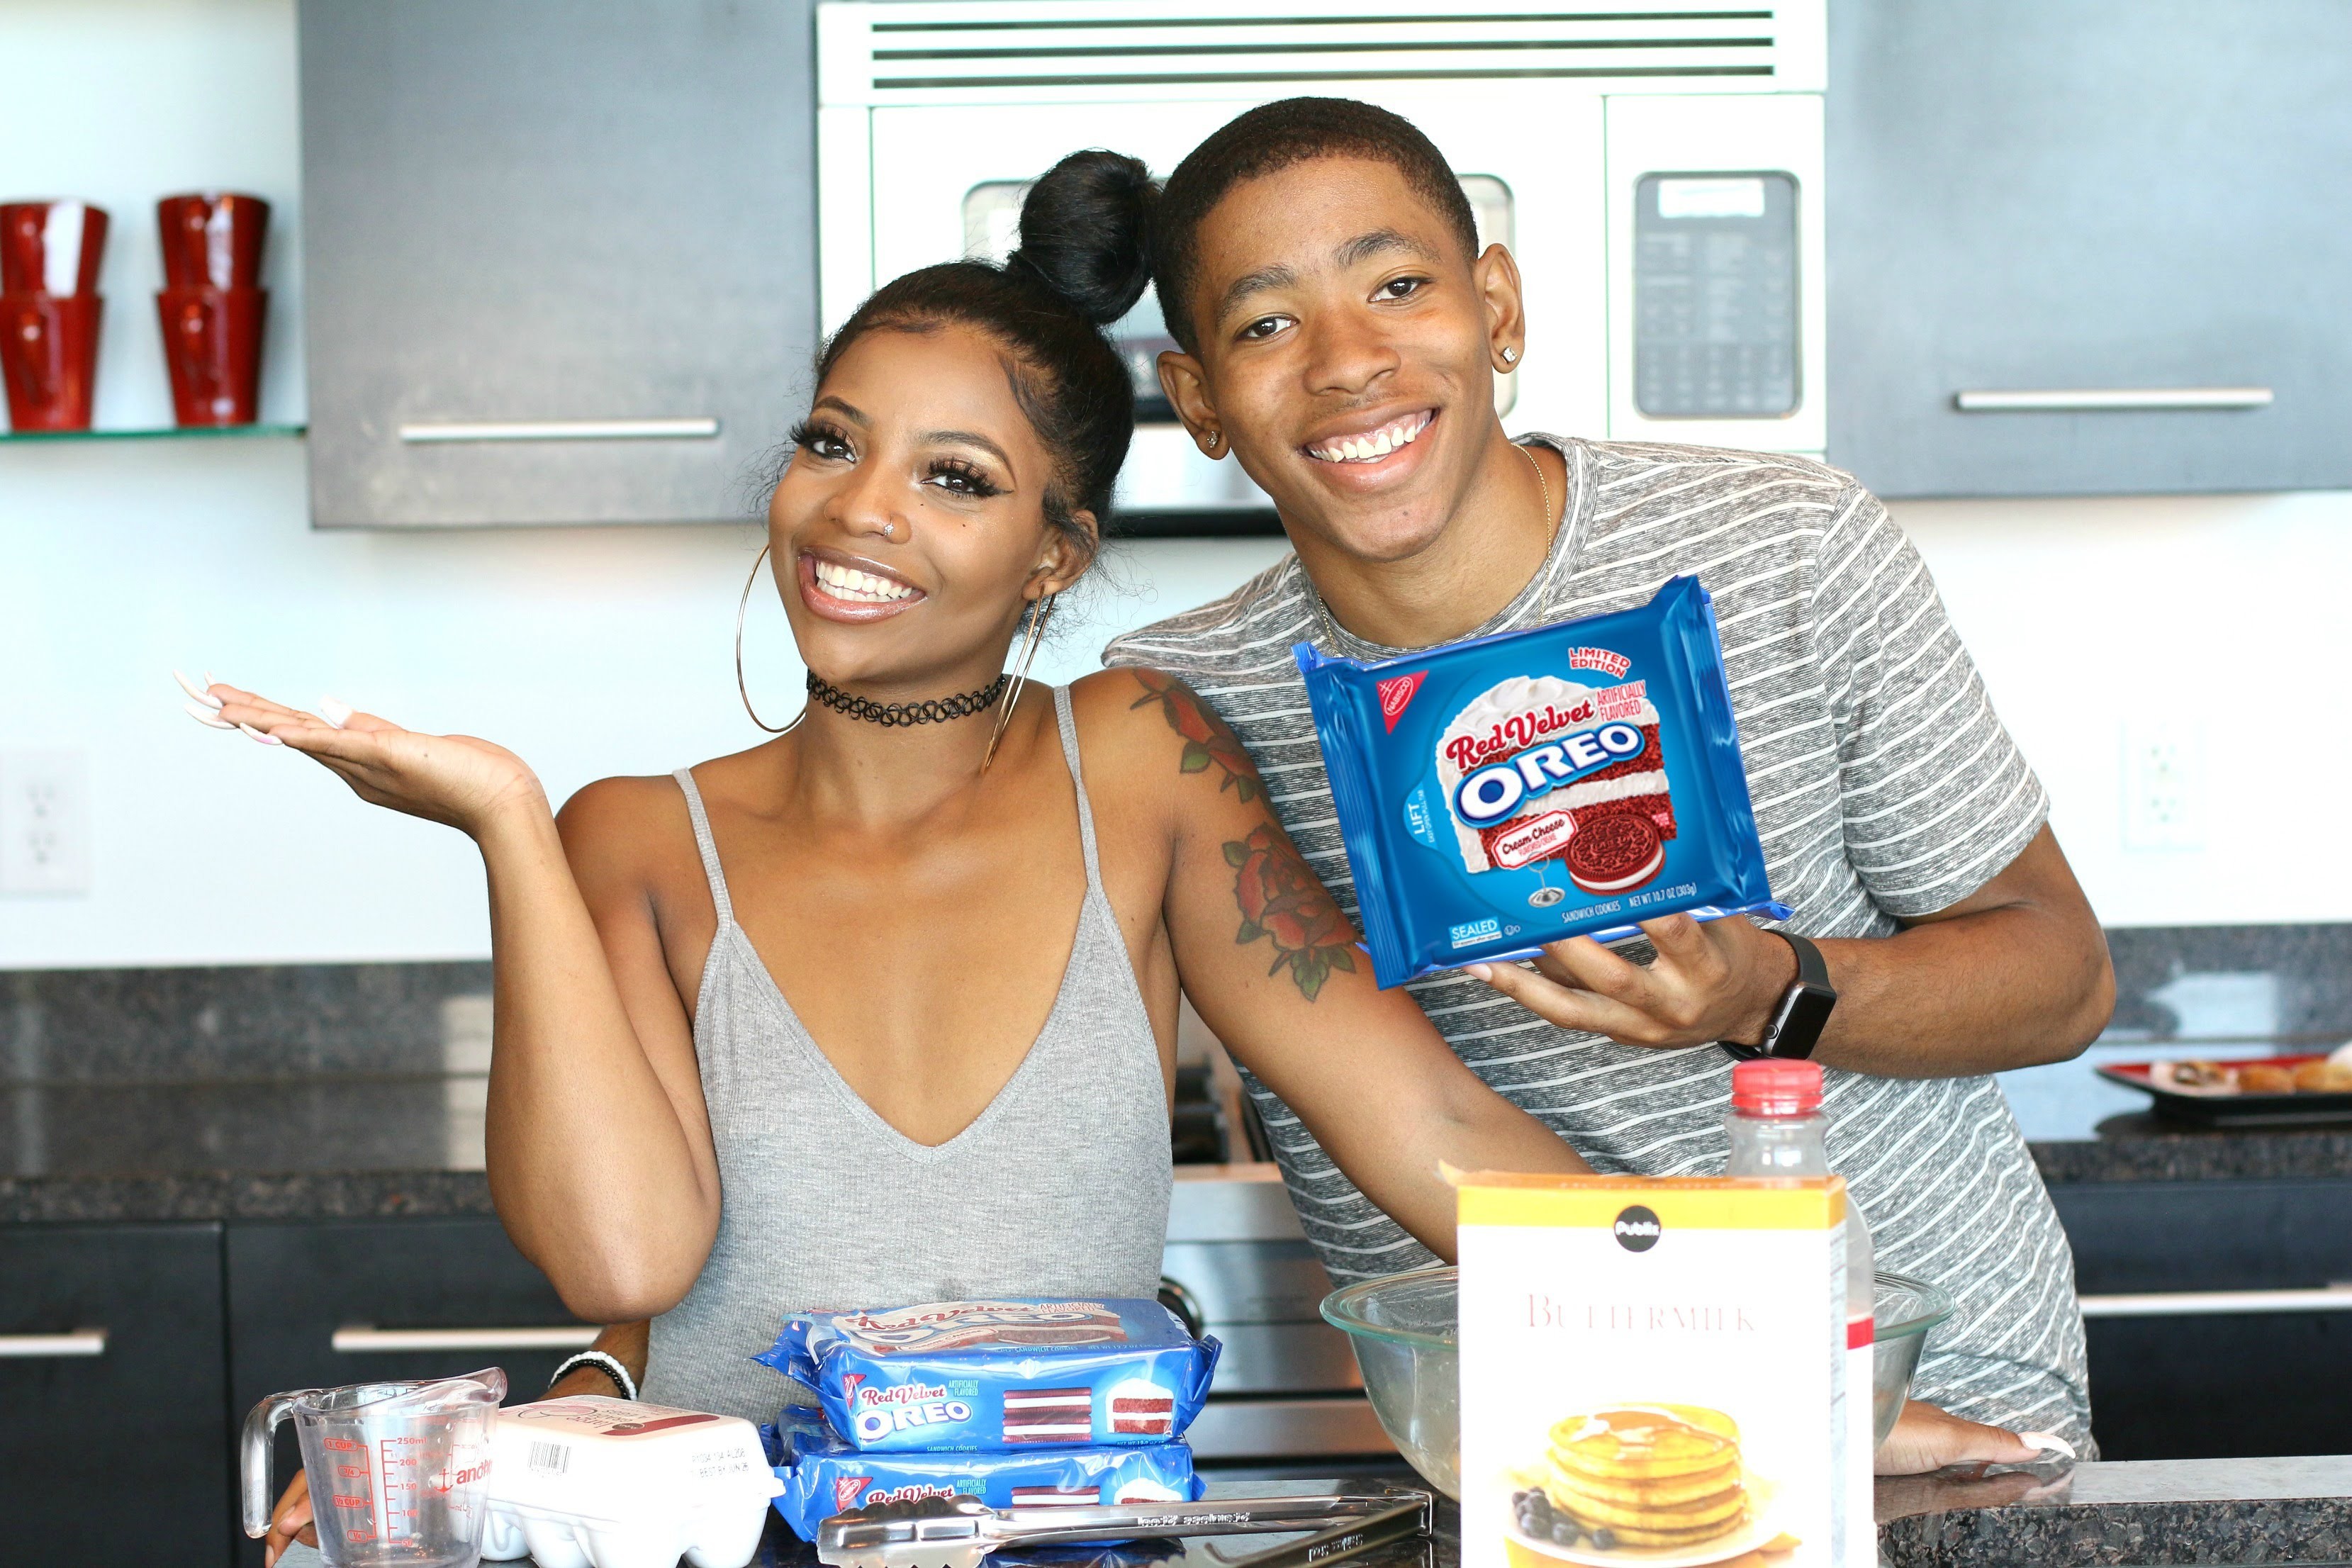 COOKING WITH DK4L, HOW TO MAKE FRIED RED VELVET OREOS 